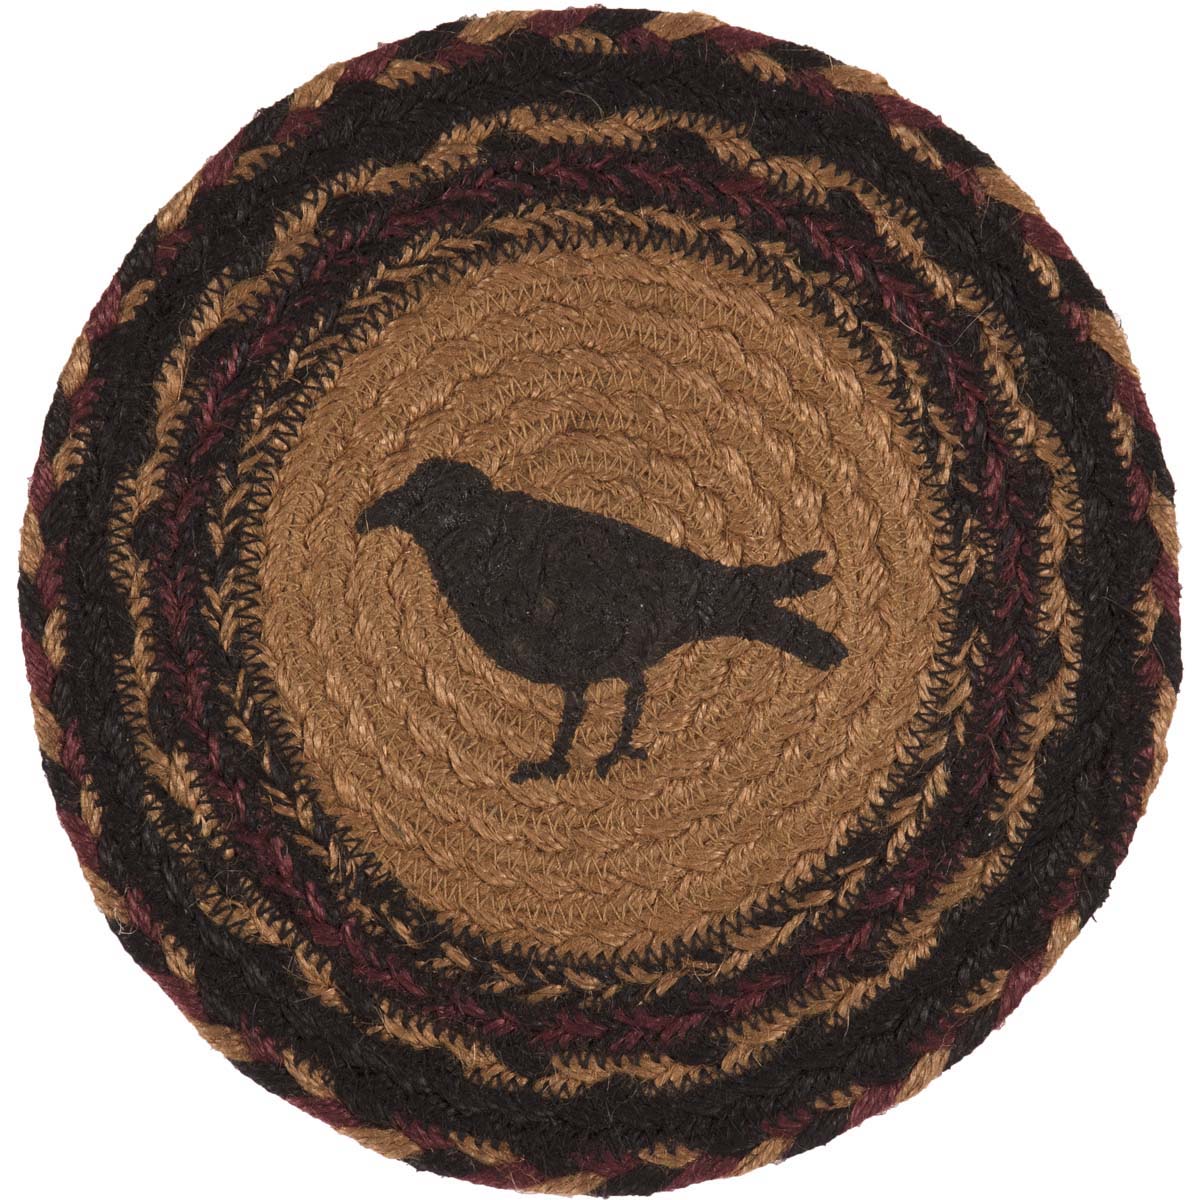 Heritage Farms Jute Oval Placemat 10x15 - On Sale - Bed Bath